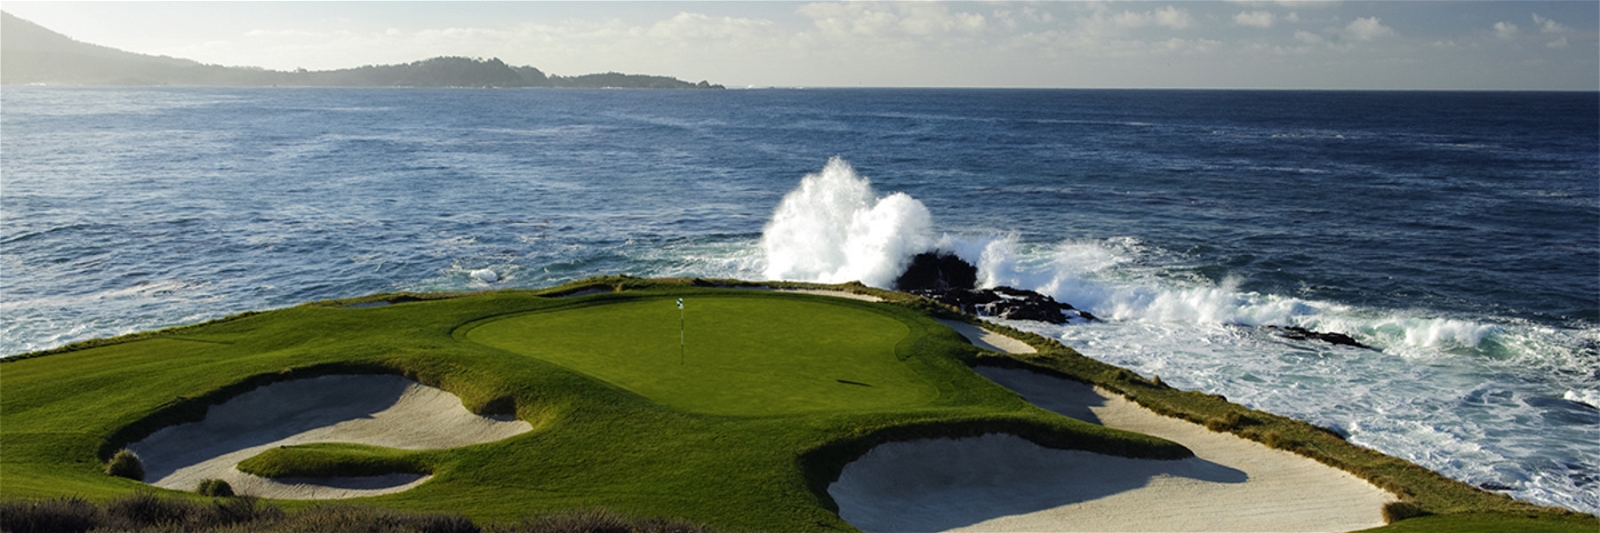 Golf Vacation Package - Pebble Beach "BUCKET LIST PACKAGE", 3 Nights & 3 Rounds